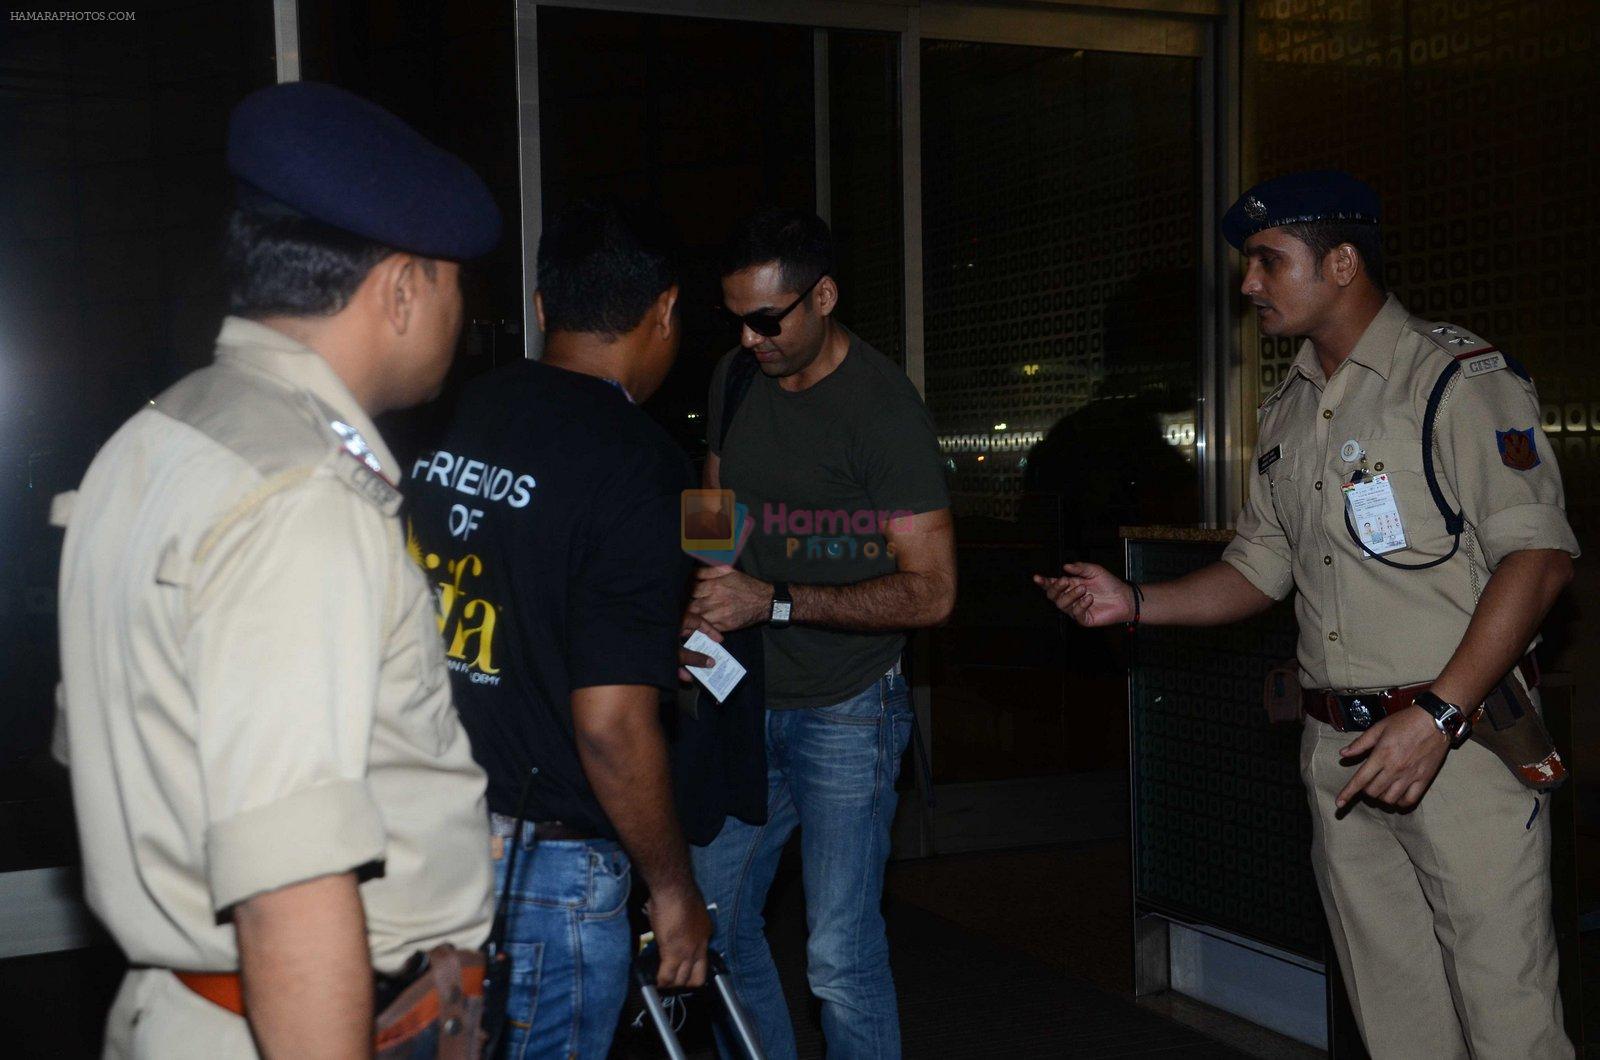 Abhay Deol leaves for IIFA on Day 2 on 21st June 2016